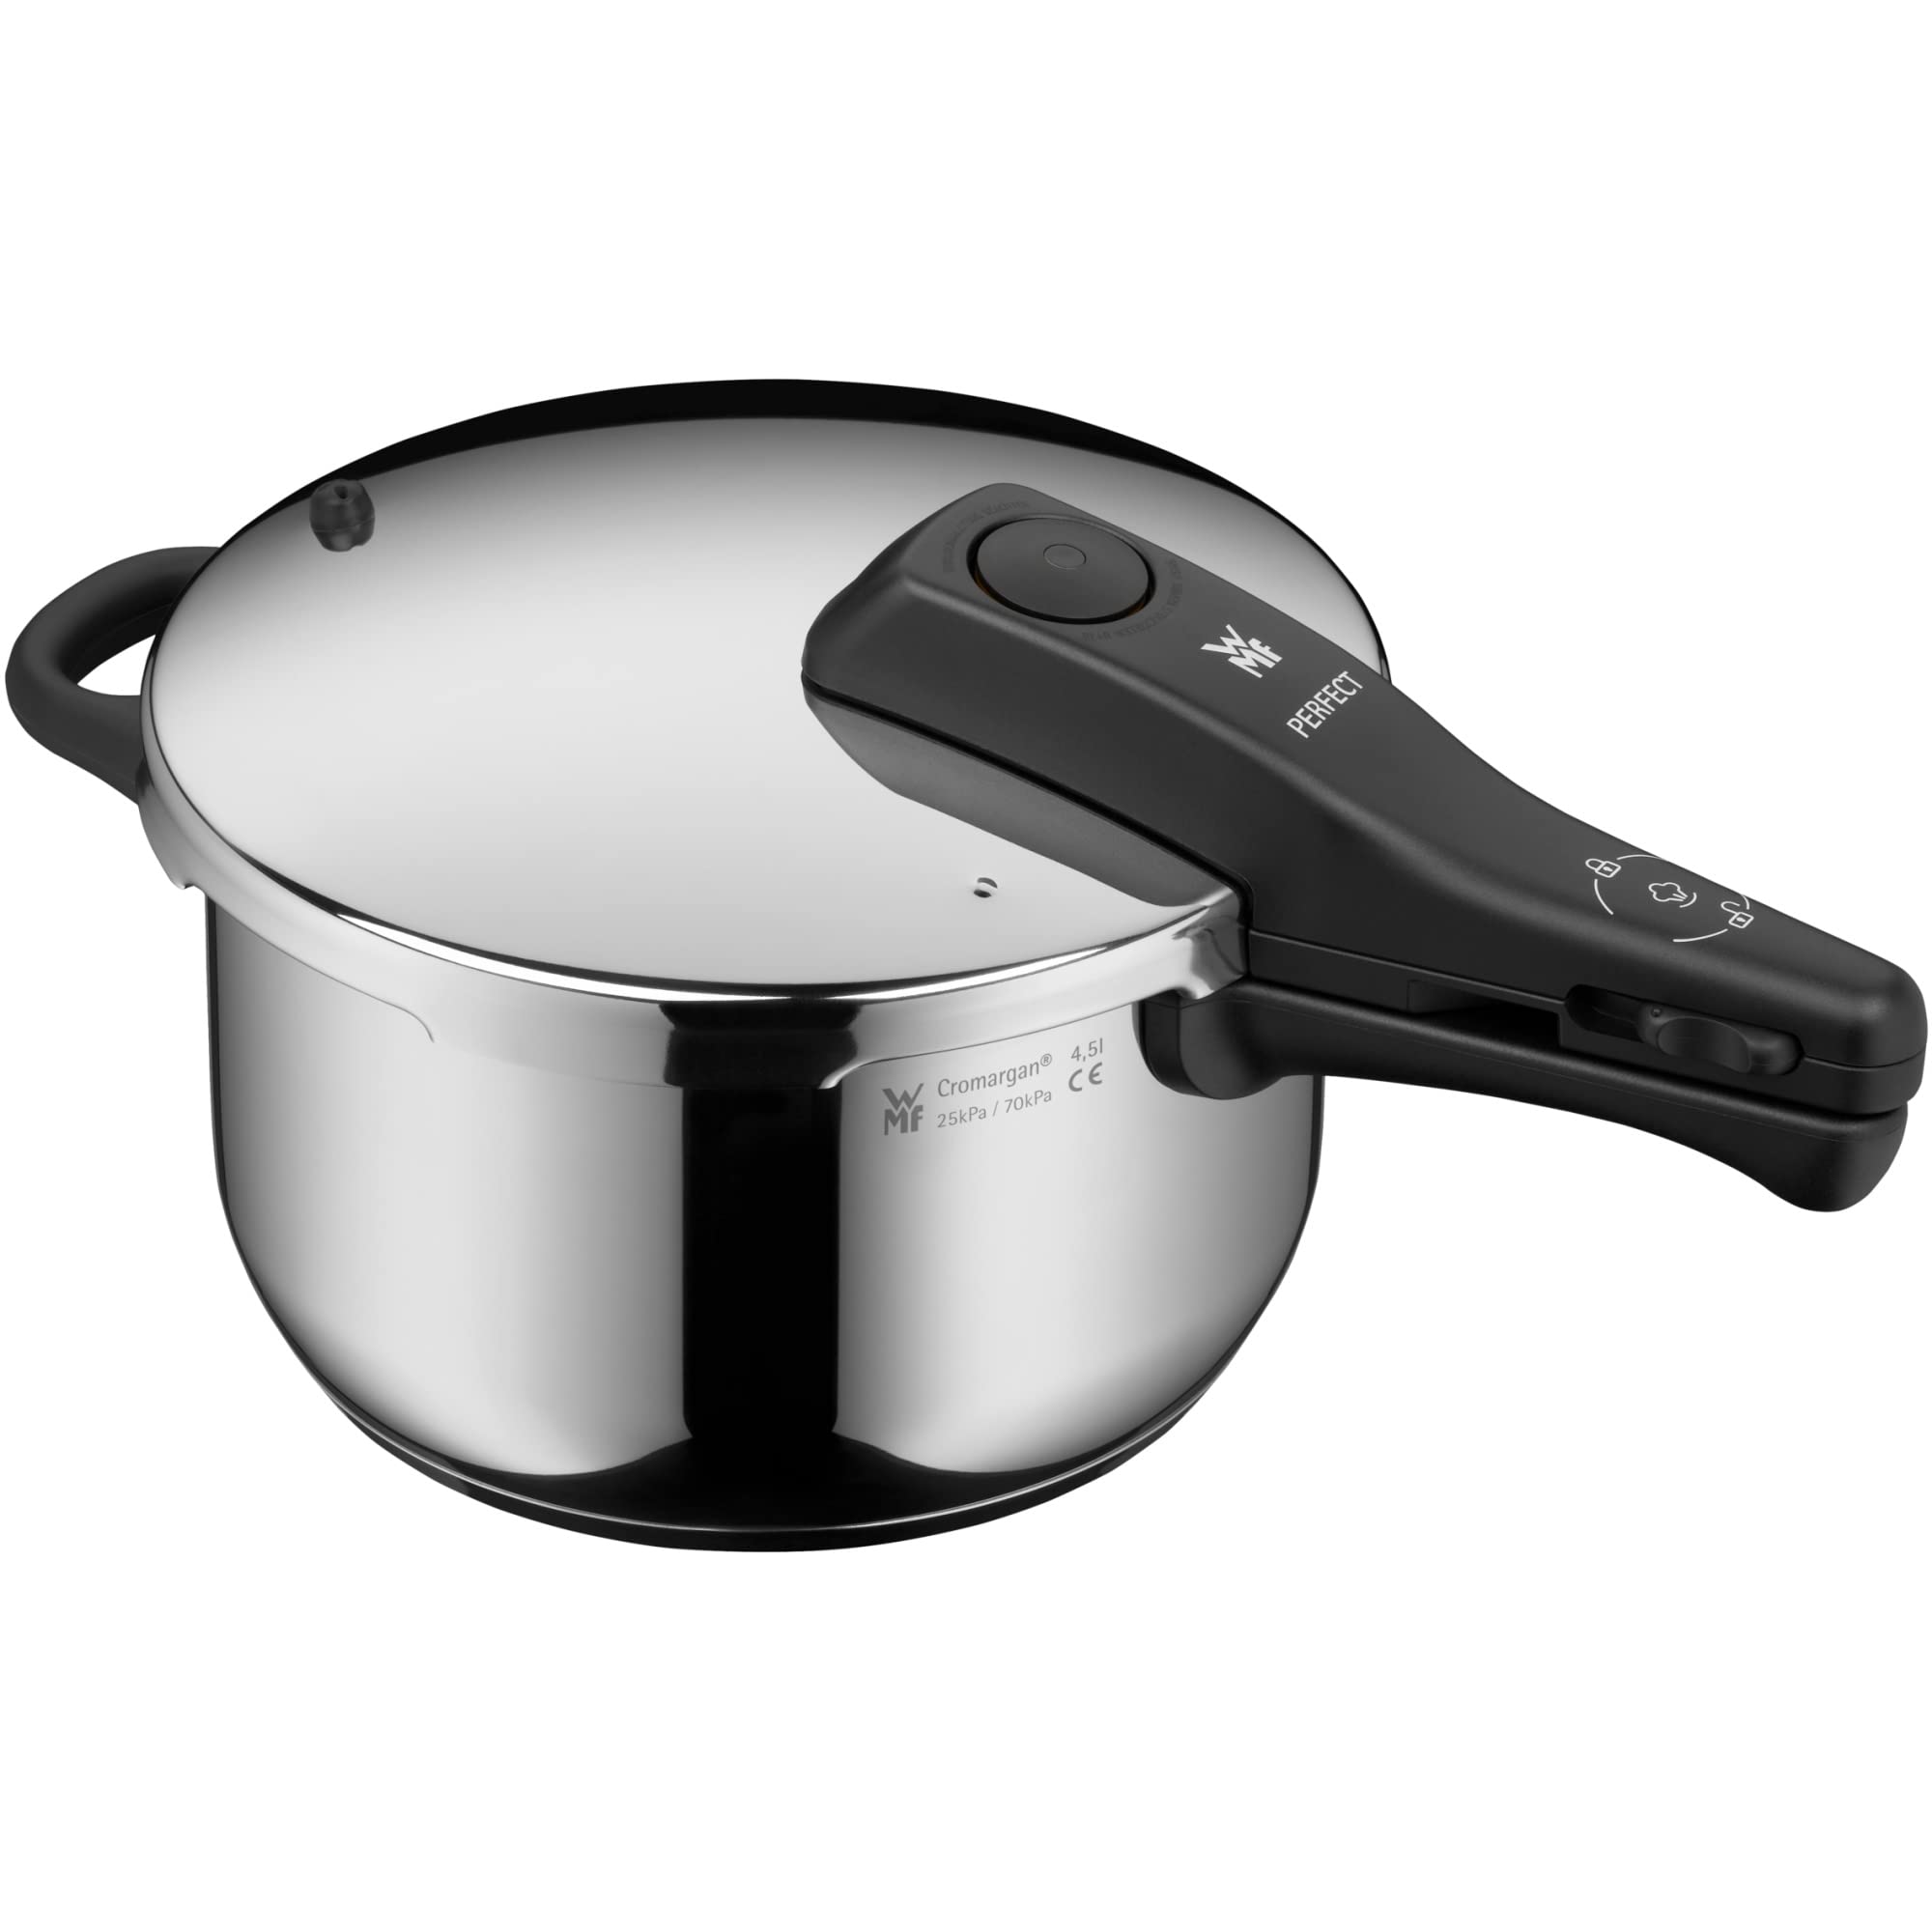 WMF Perfect Pressure Cooker Induction 4.5 L, Pressure Cooker, Large Cooking Signal, 2 Cooking Levels, Removable Lid Handle, Crom